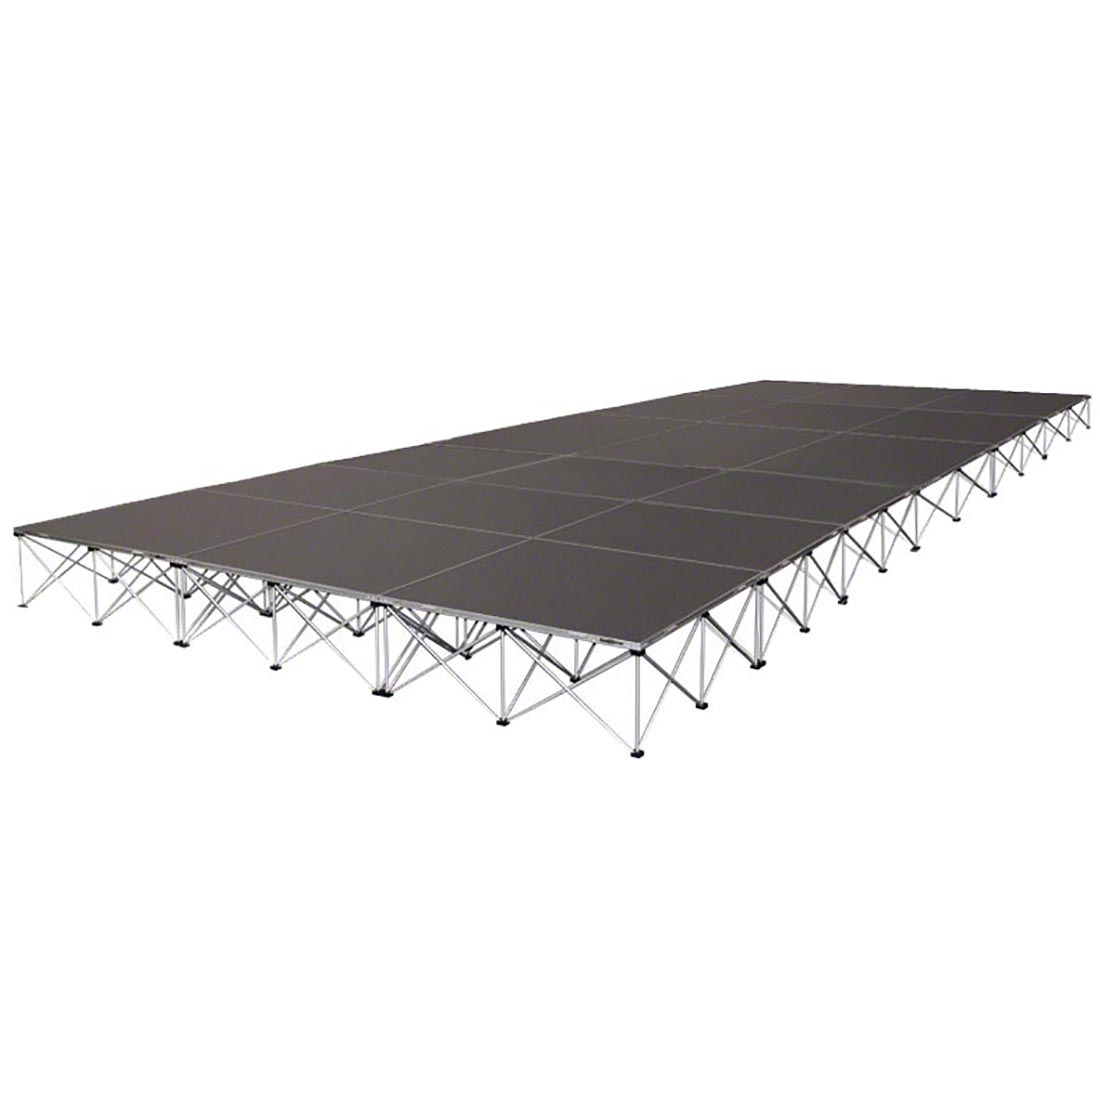 IntelliStage Lightweight 12'x24' Portable Stage System, (4' Units)